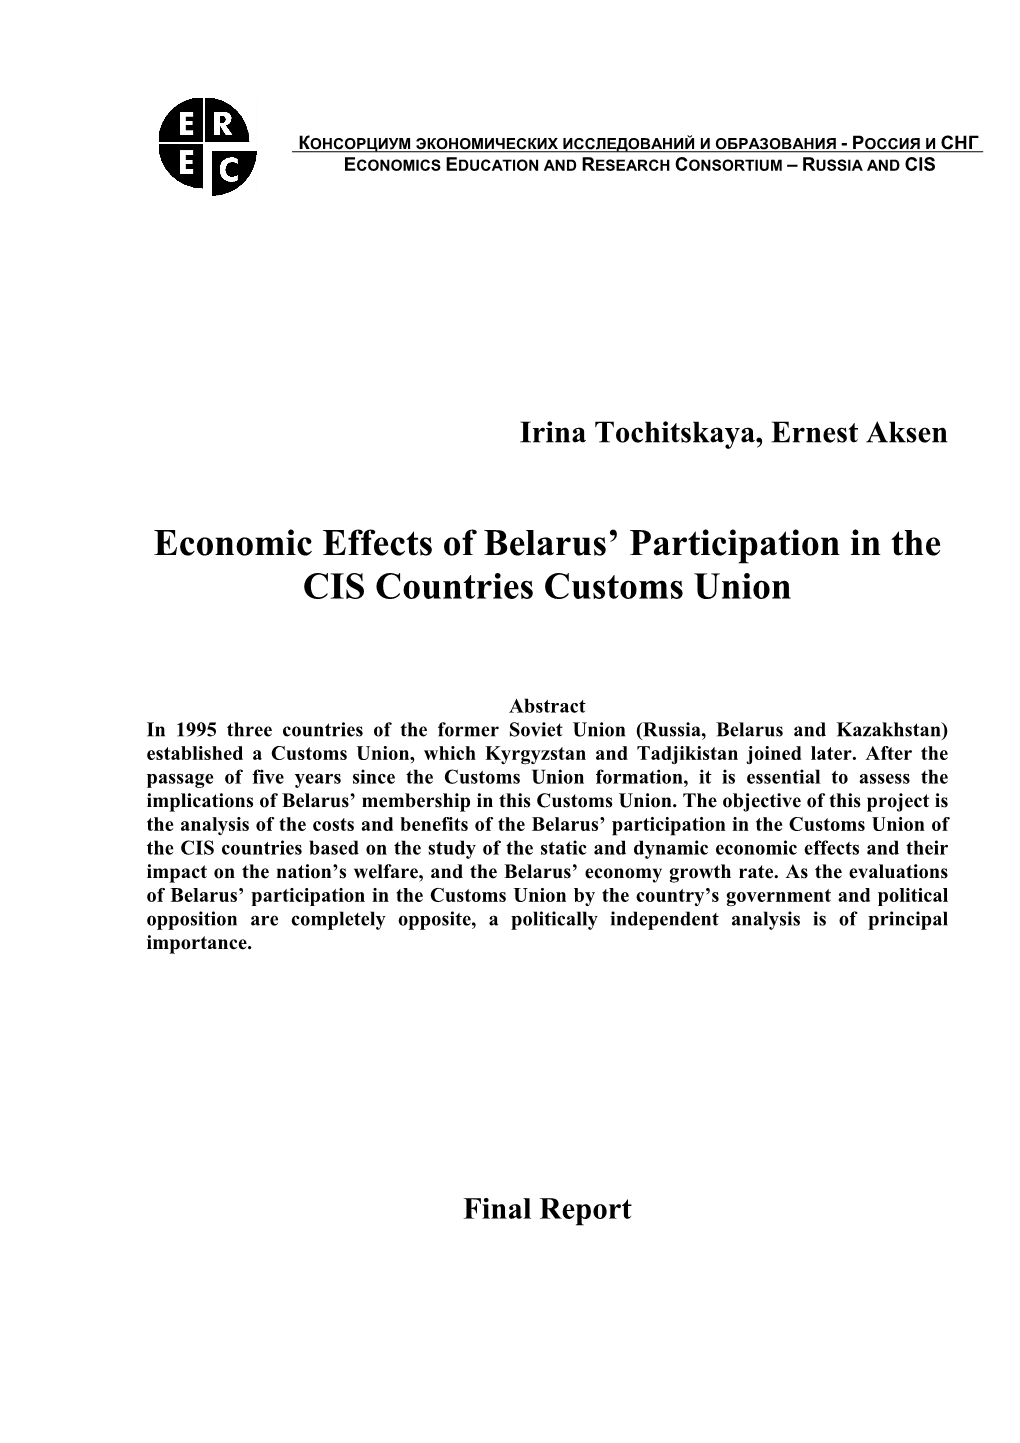 Economic Effects of Belarus' Participation in the CIS Countries Customs Union in 1995 - 2000